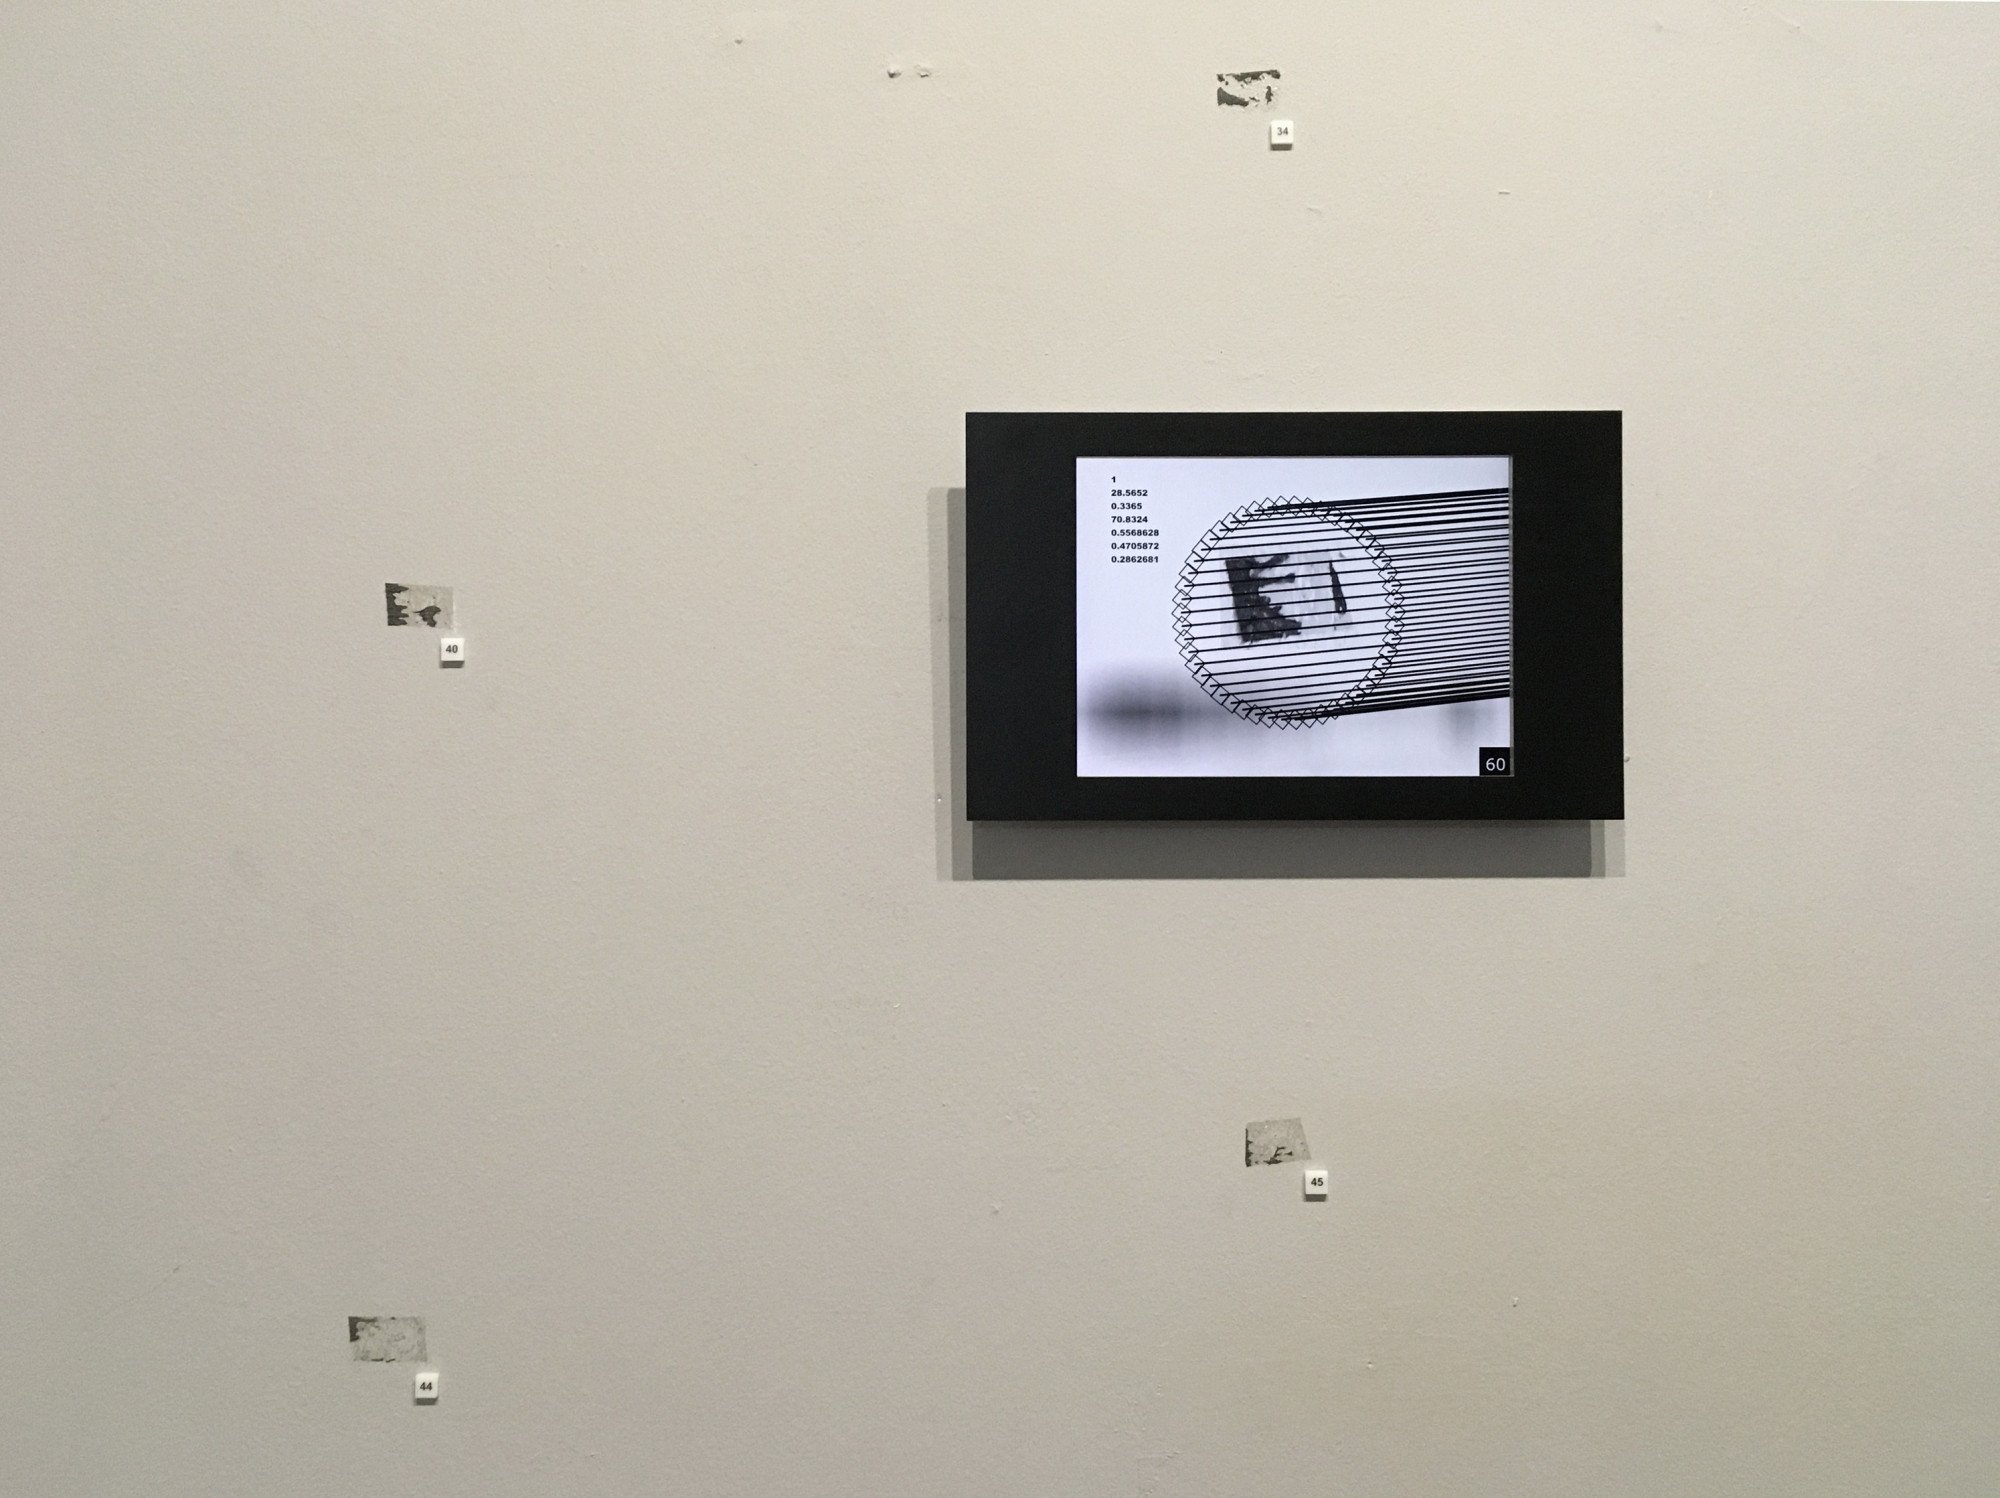 Fragment of the Tape Marks installation, 2o19. Impulse exhibition, Kuryokhin Centre, St Petersburg. An algorithm gathers information from tape marks that remained from a previous exhibition